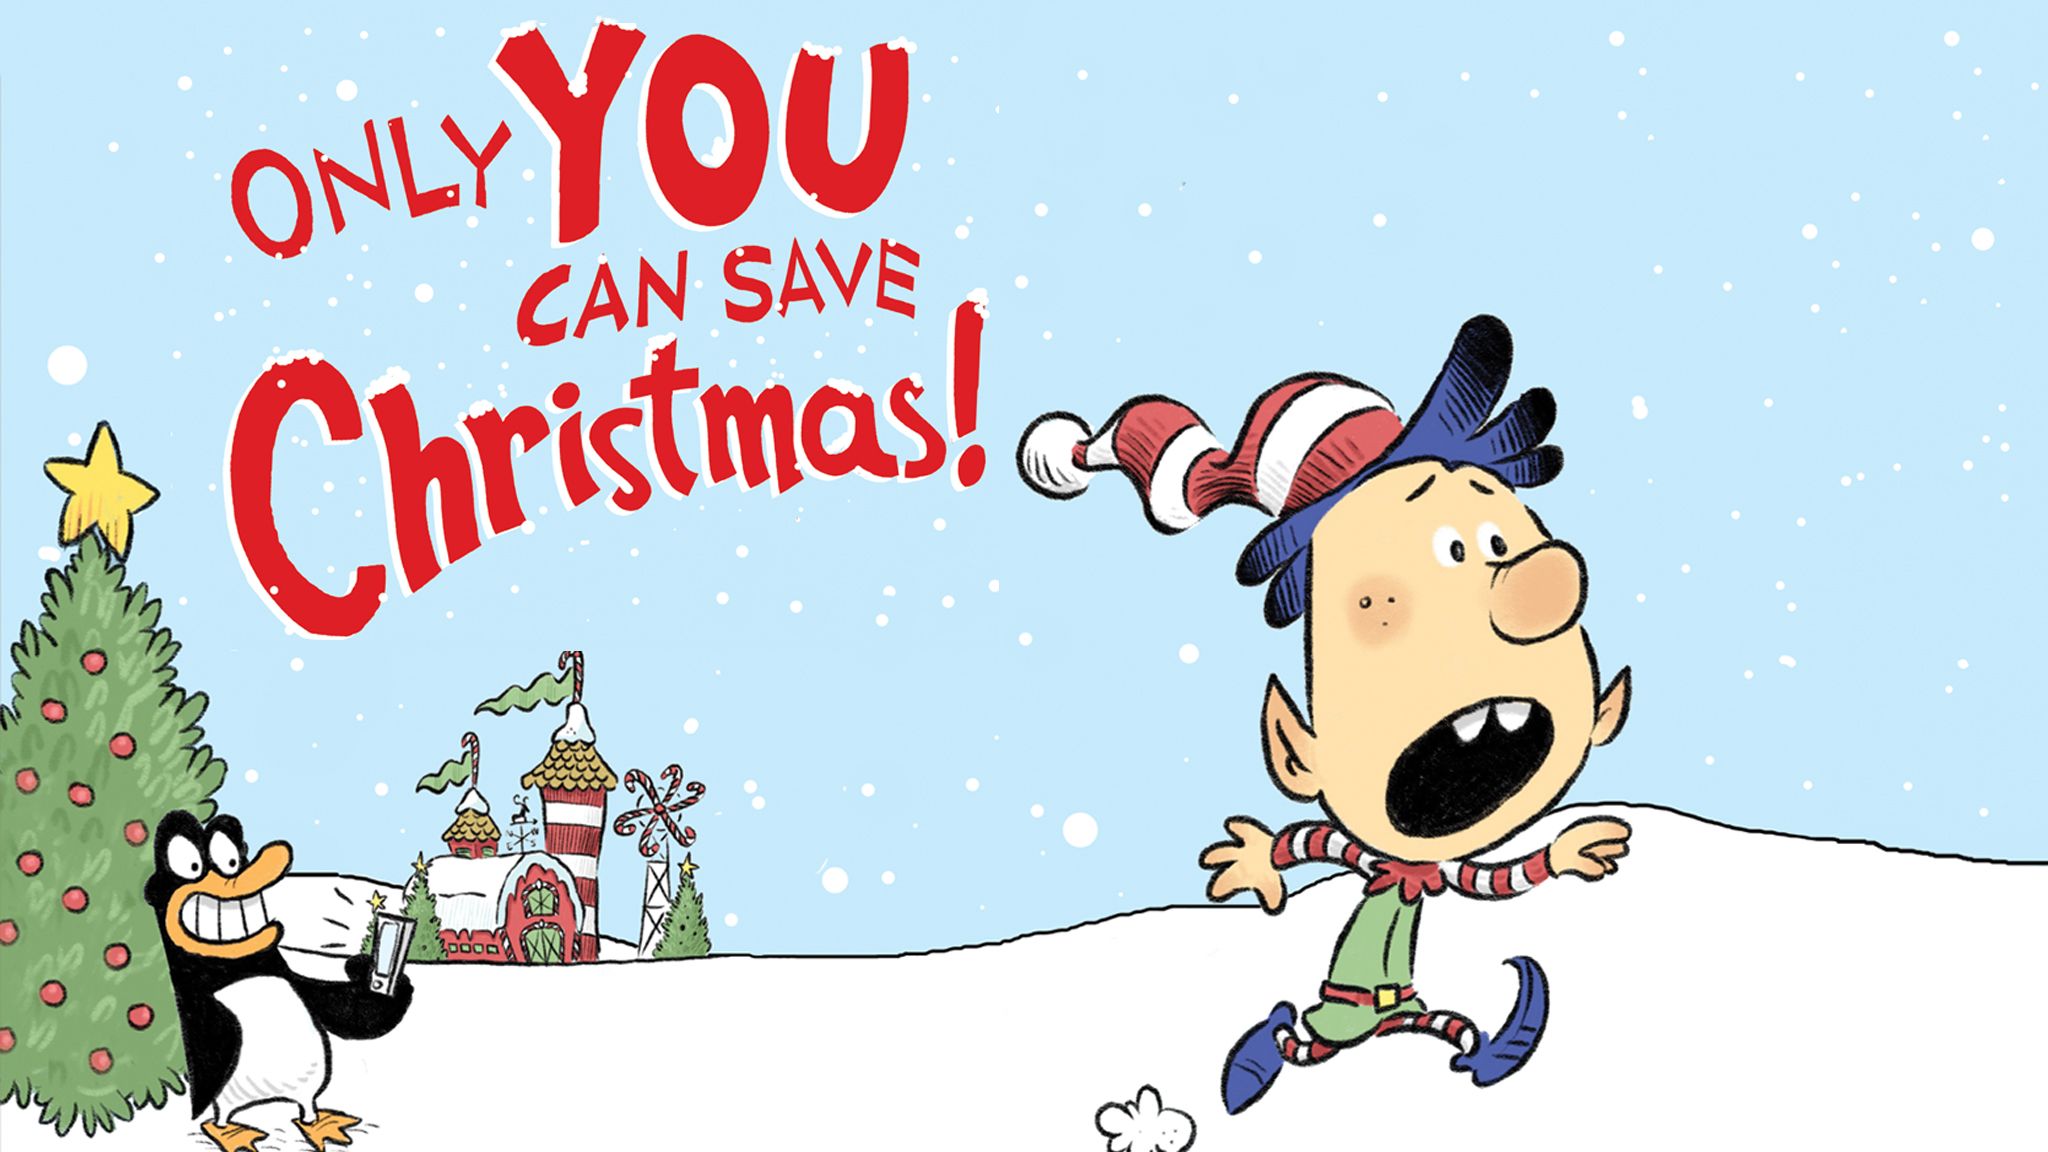 Only YOU Can Save Christmas